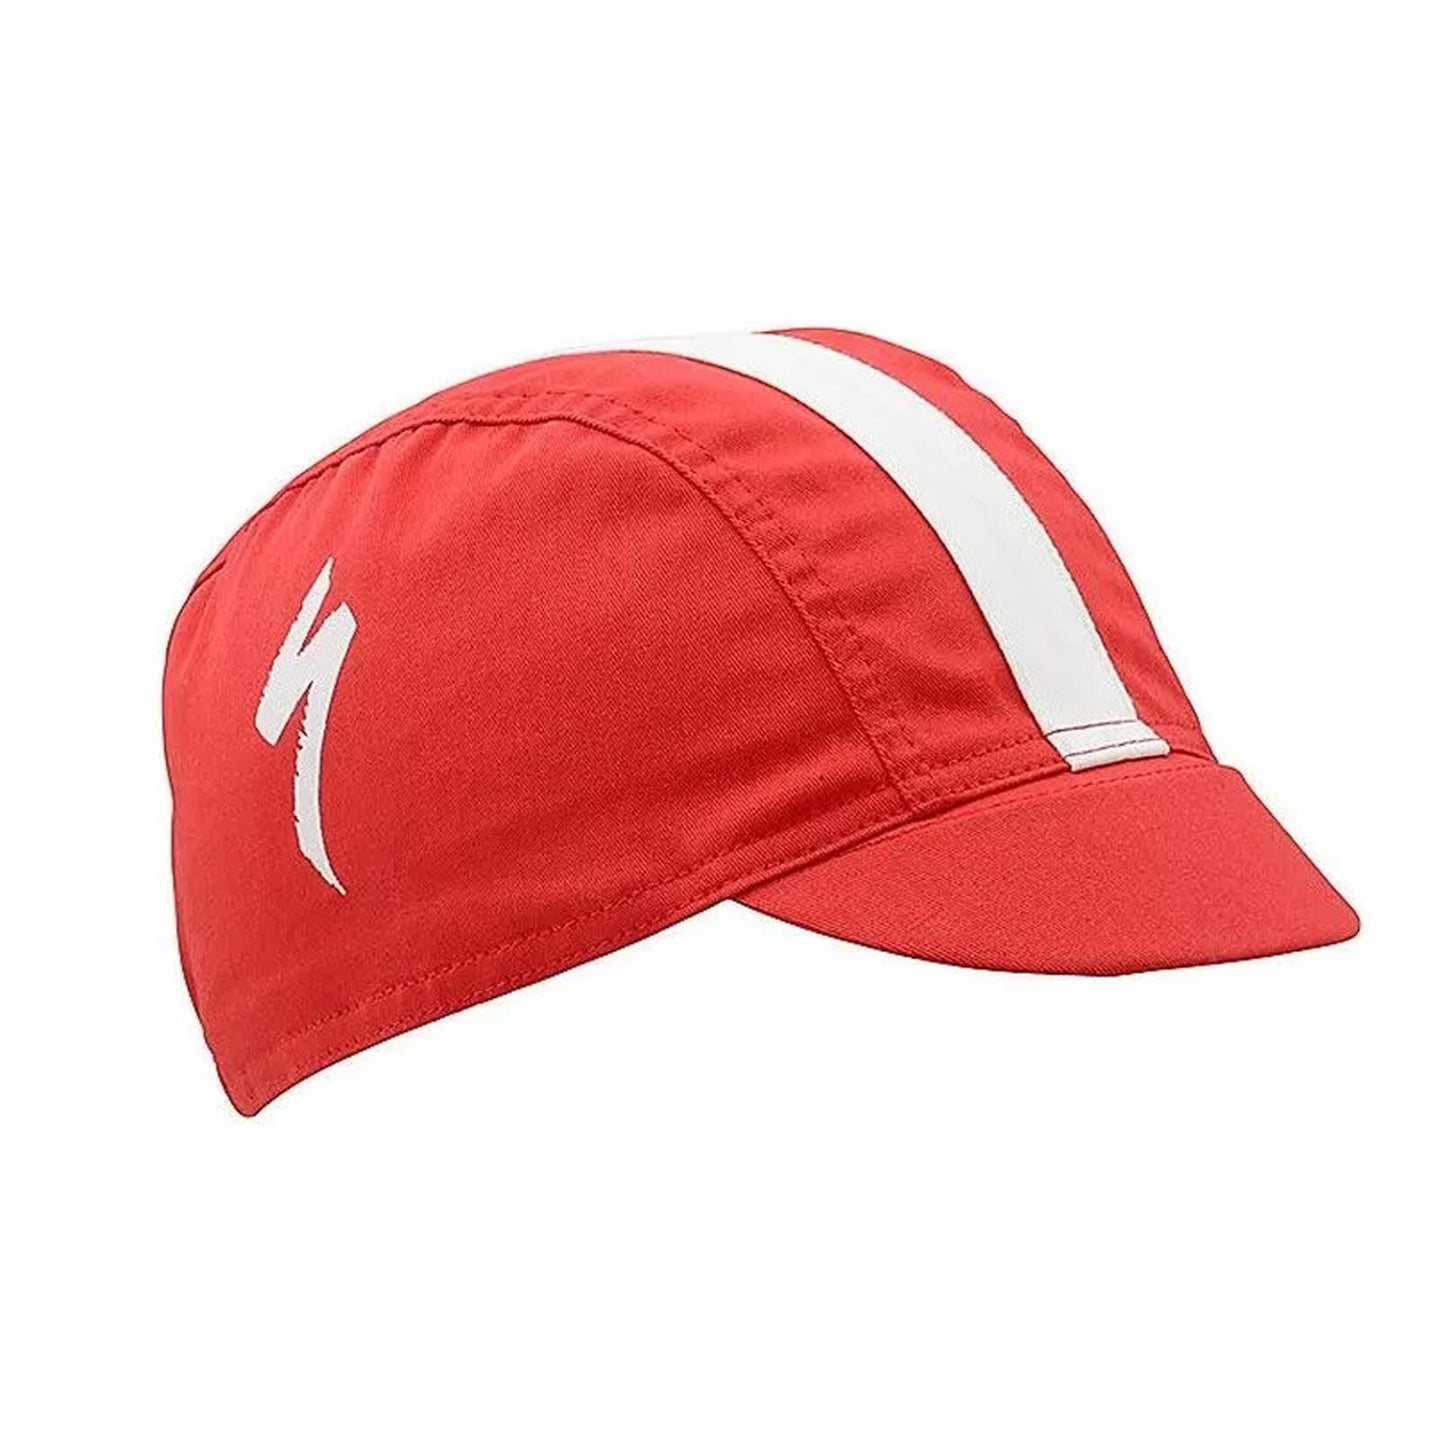 Specialized Podium Cap Cycling Fit, Red, One Size